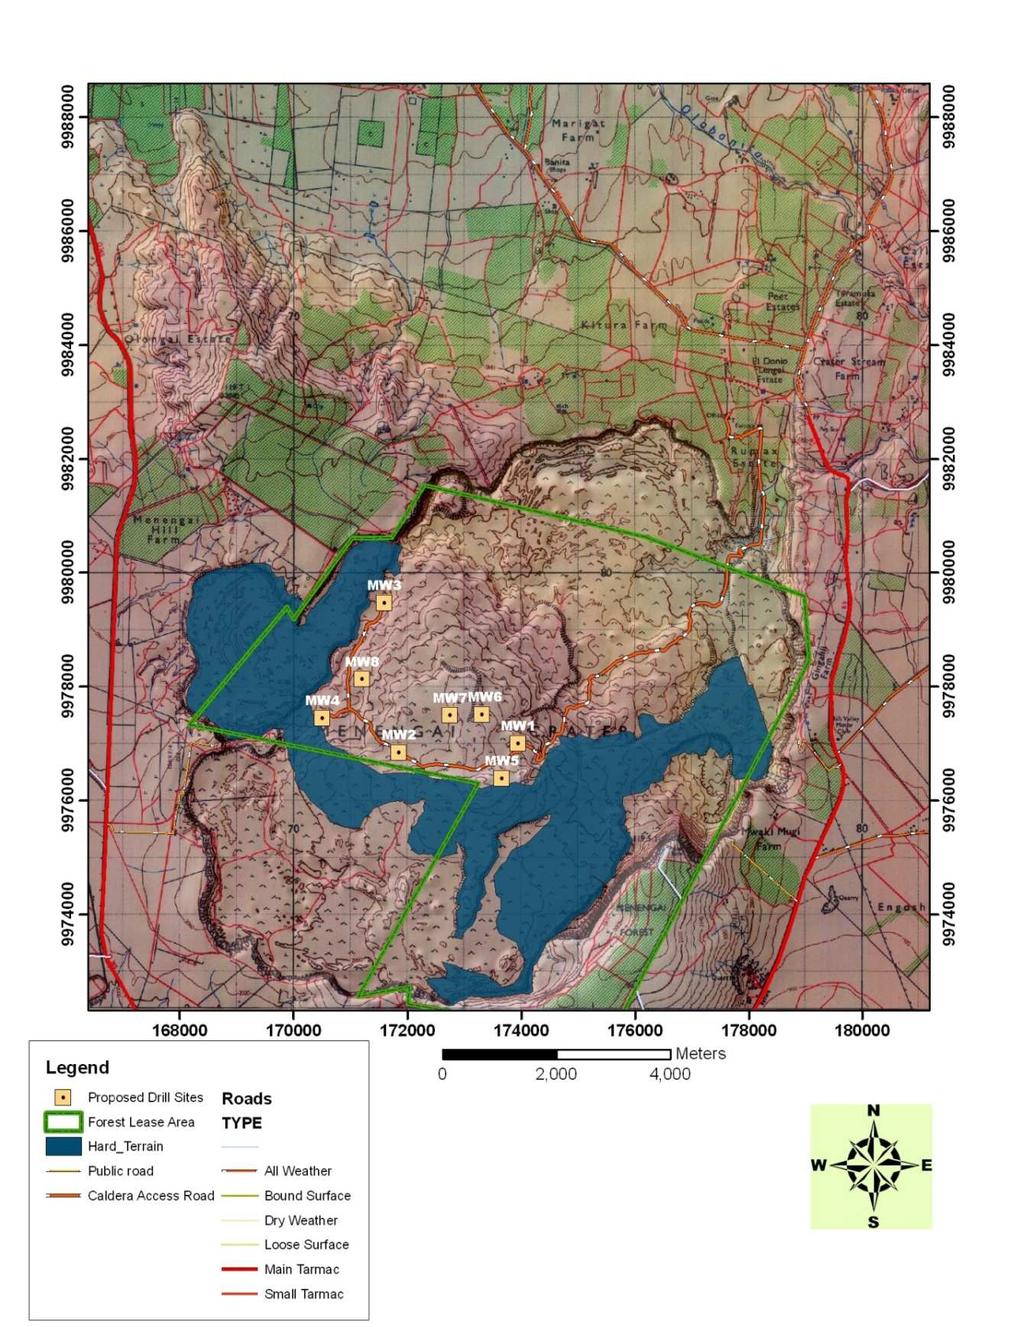 Figure 7: Map showing proposed geothermal well drill sites in Menengai prospect.